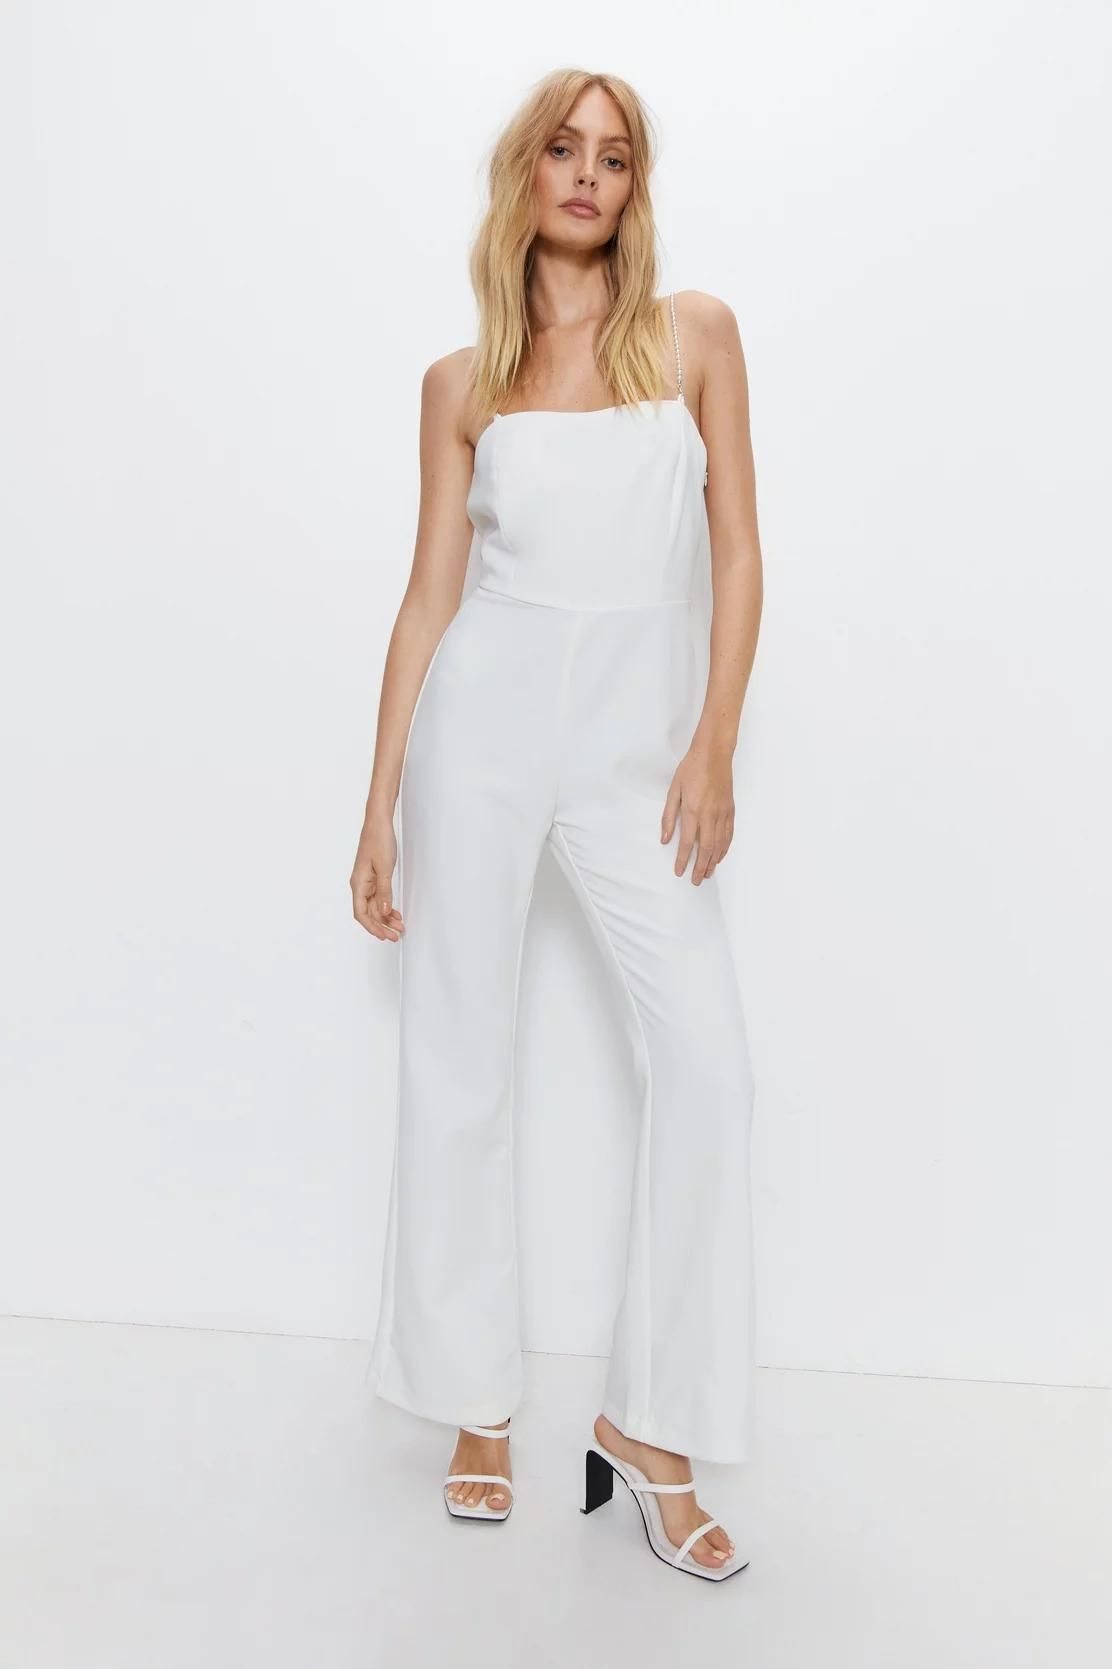 <p><strong>£62.30</strong></p><p><a href="https://www.warehousefashion.com/premium-pearl-strap-jumpsuit/BWW05186.html">Shop Now</a></p><p>Warehouse's bridal jumpsuit features a cool cut-out back design and pretty faux-pearl straps. Wear yours with a matching white blazer for civil ceremonies or jazz it up for Hen do's and engagement parties with platform heels.</p>